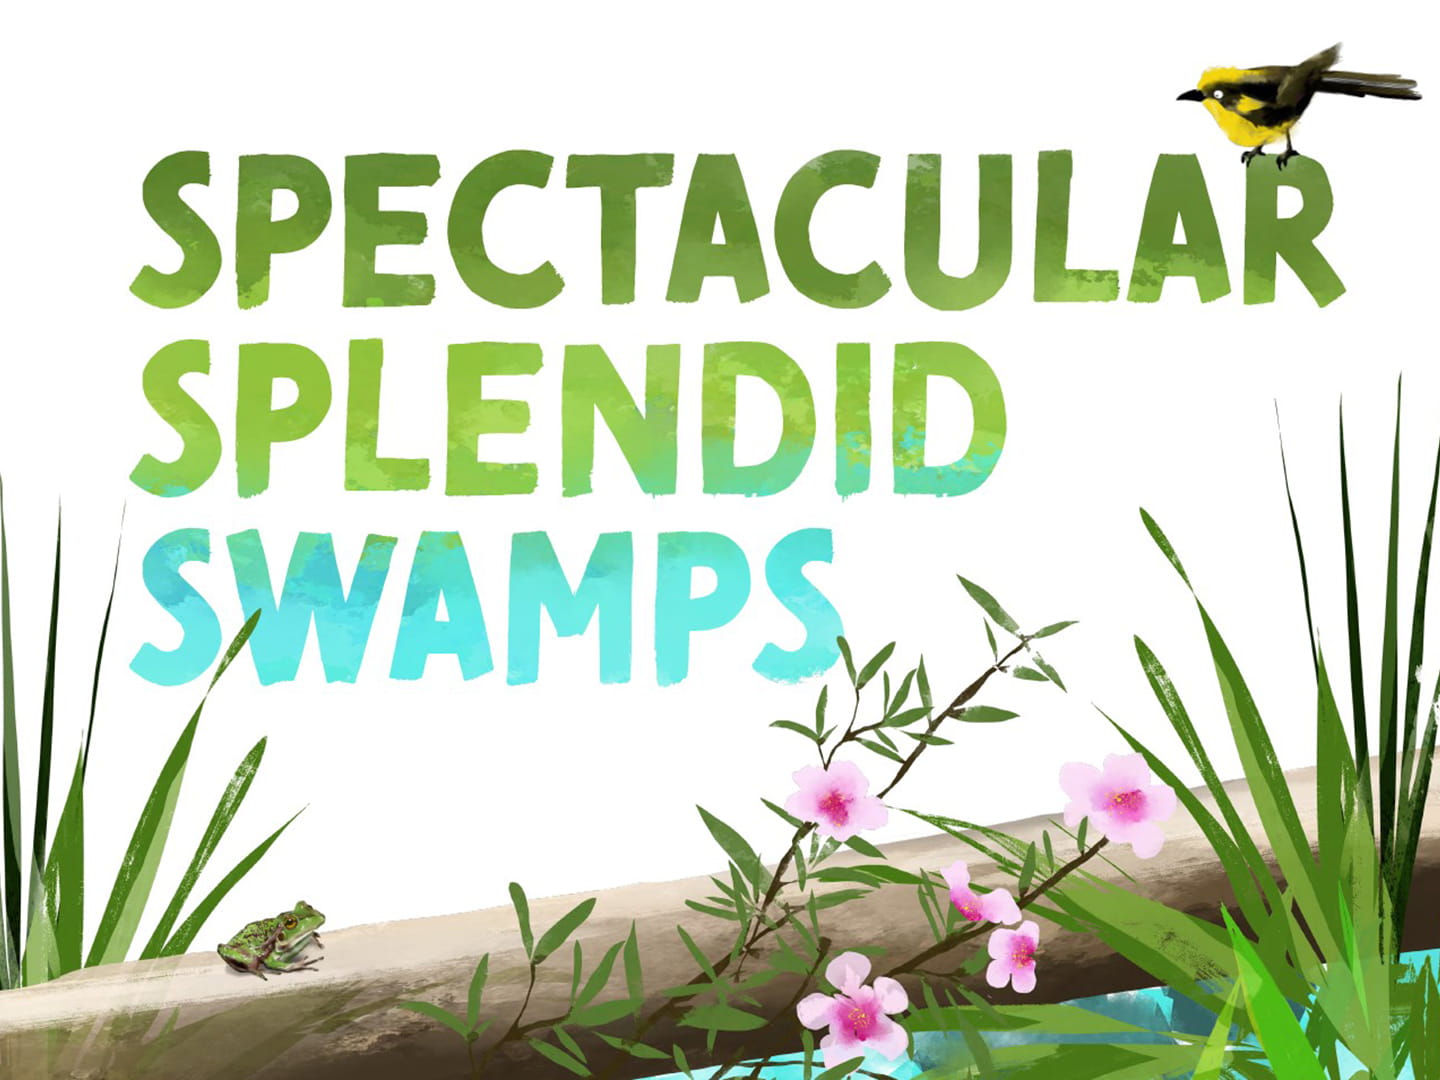 Illustrated image of a small bird and a swamp with the book title in the centre